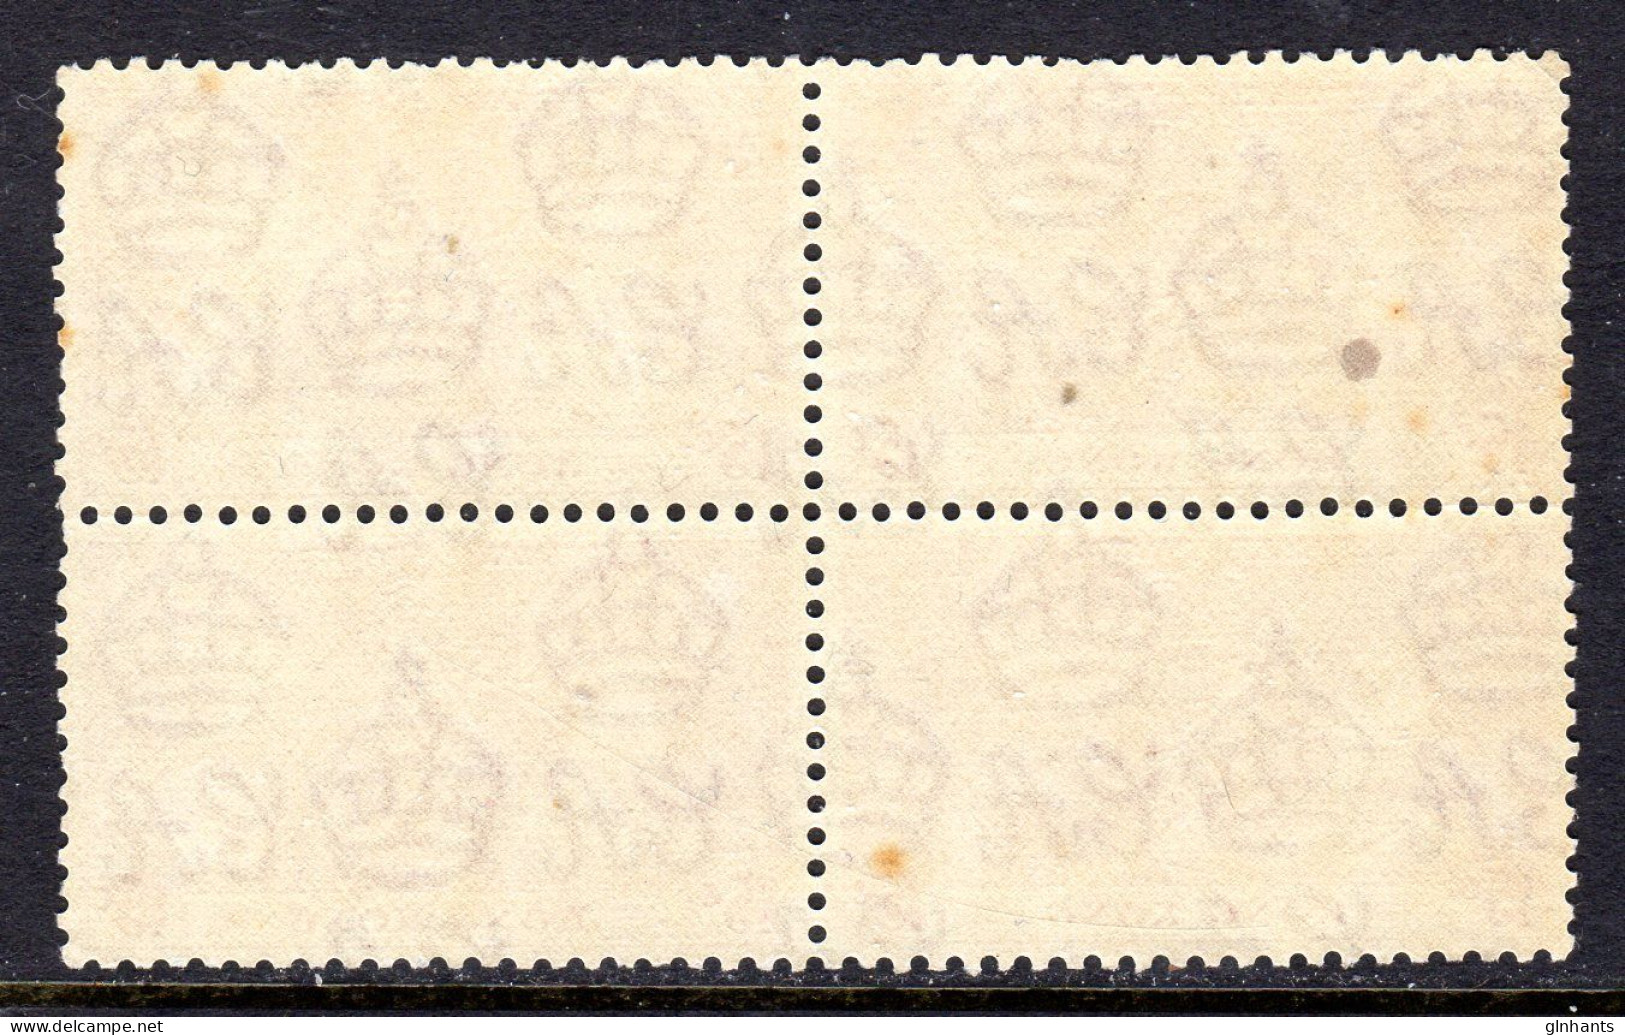 HONG KONG - 1937 CORONATION 15c STAMP IN BLOCK OF 4 MOUNTED/UNMOUNTED  MINT MM.MNH */** SG 138 X 4 (2 SCANS) - Unused Stamps